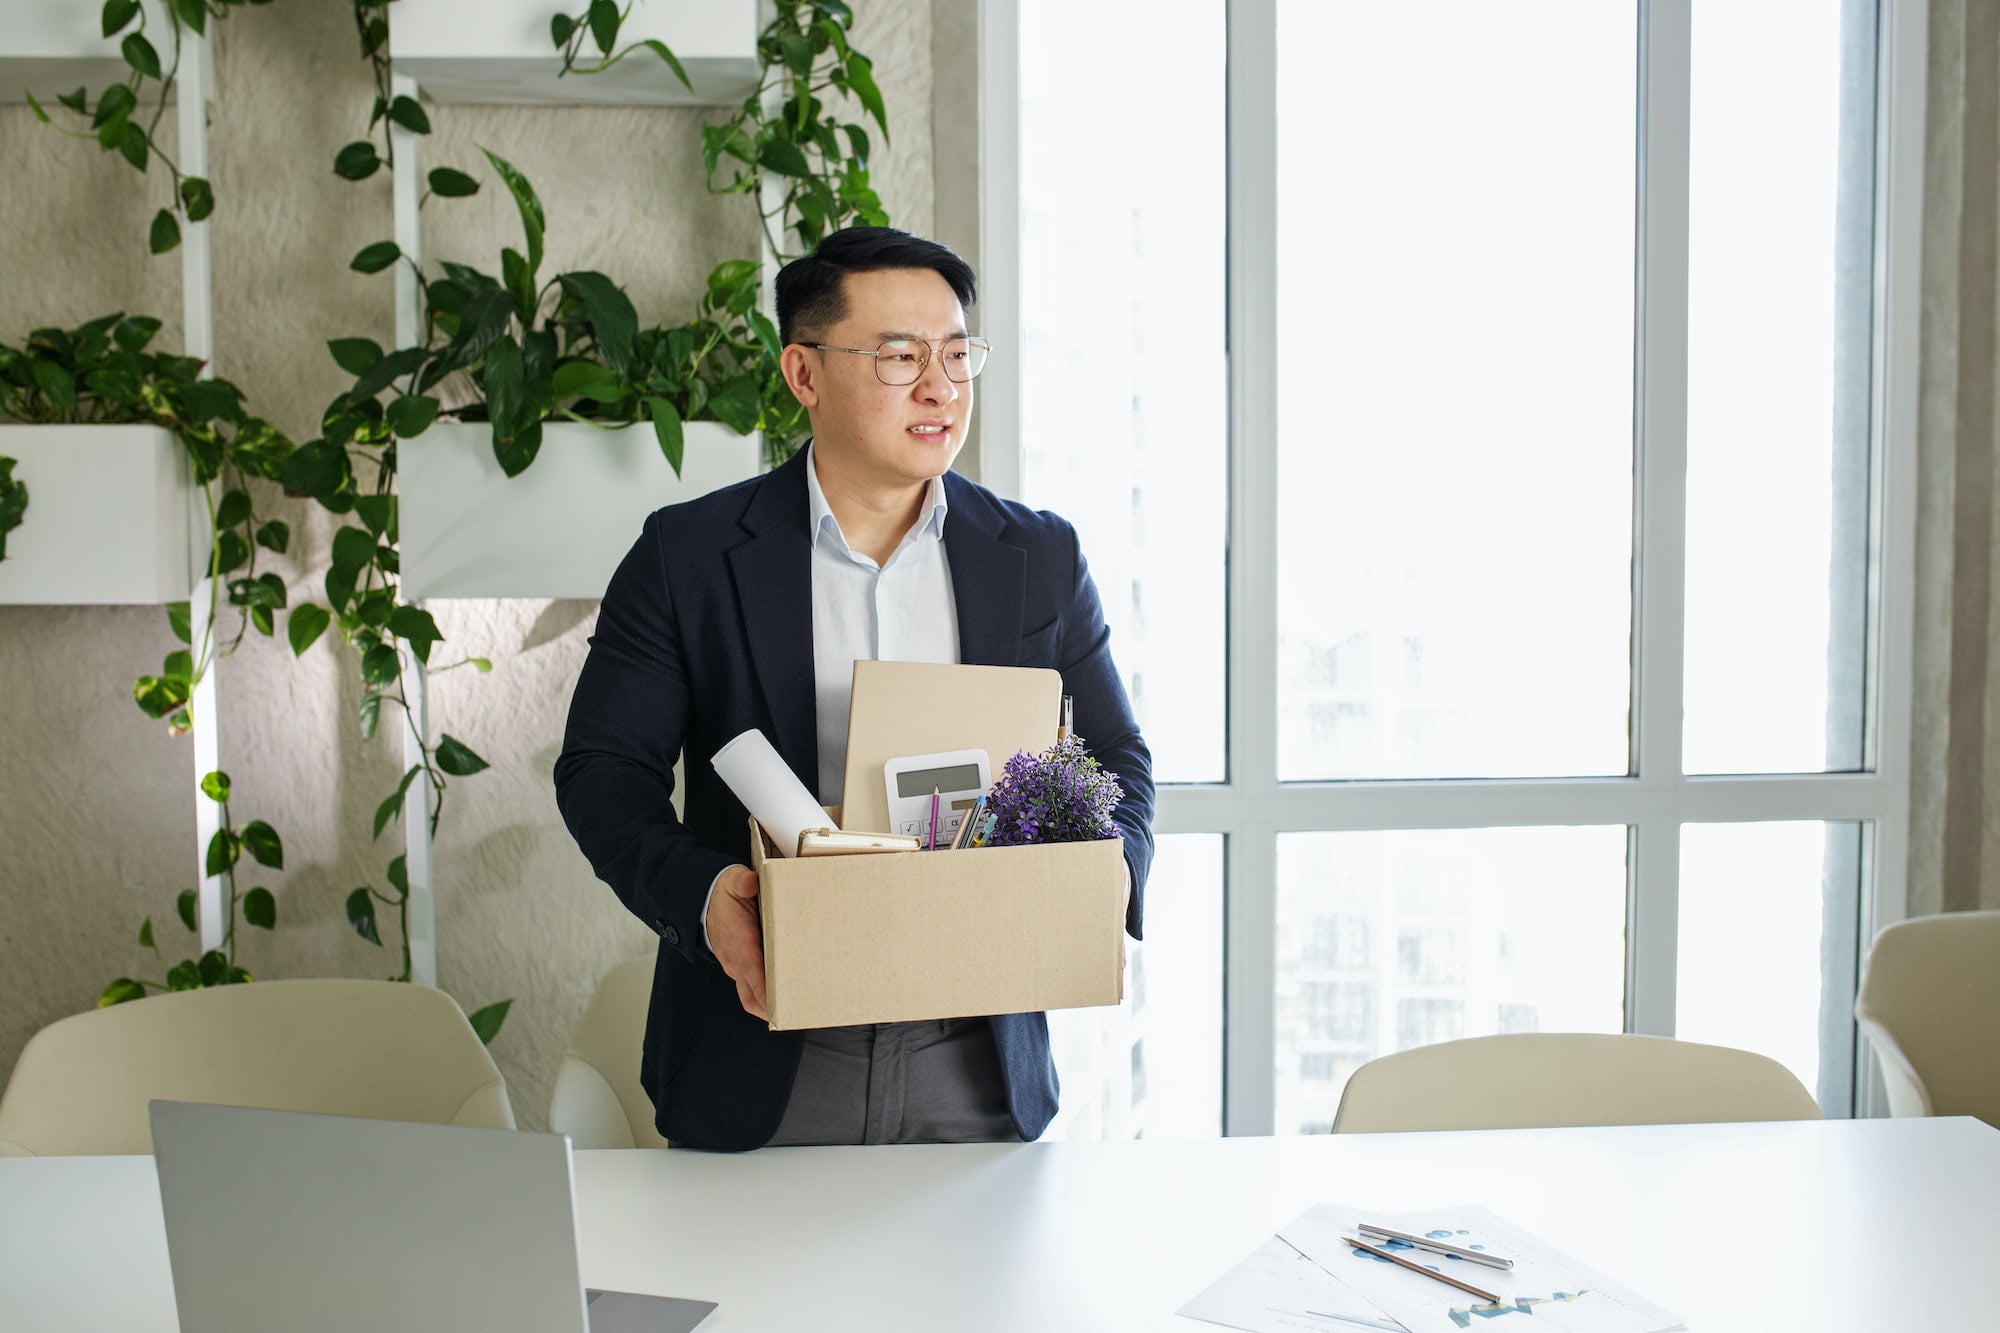 Asian businessman holding a box in an office.